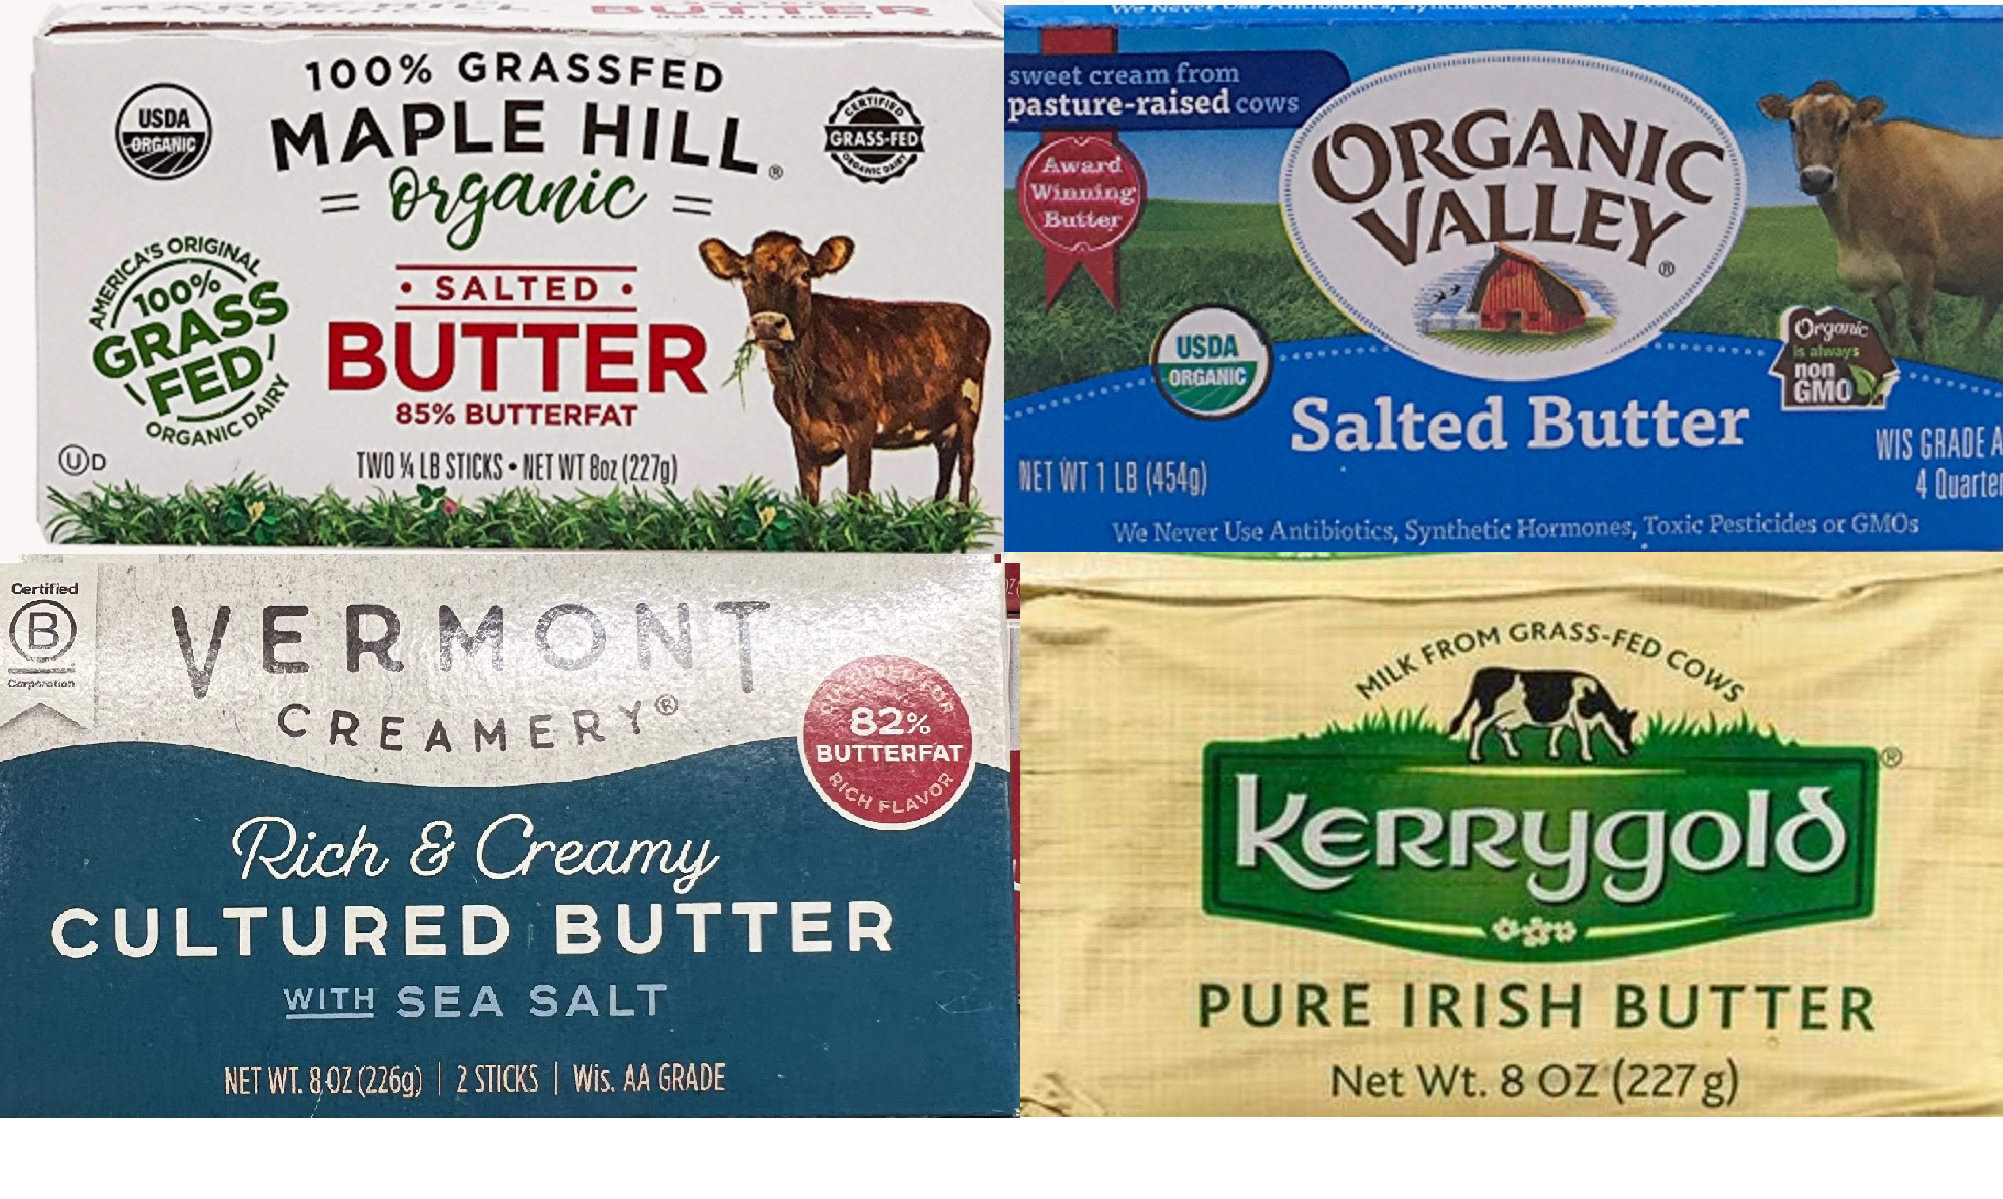 Which Grass-Fed Butter is the Best? - A Review of 5 Grass-Fed